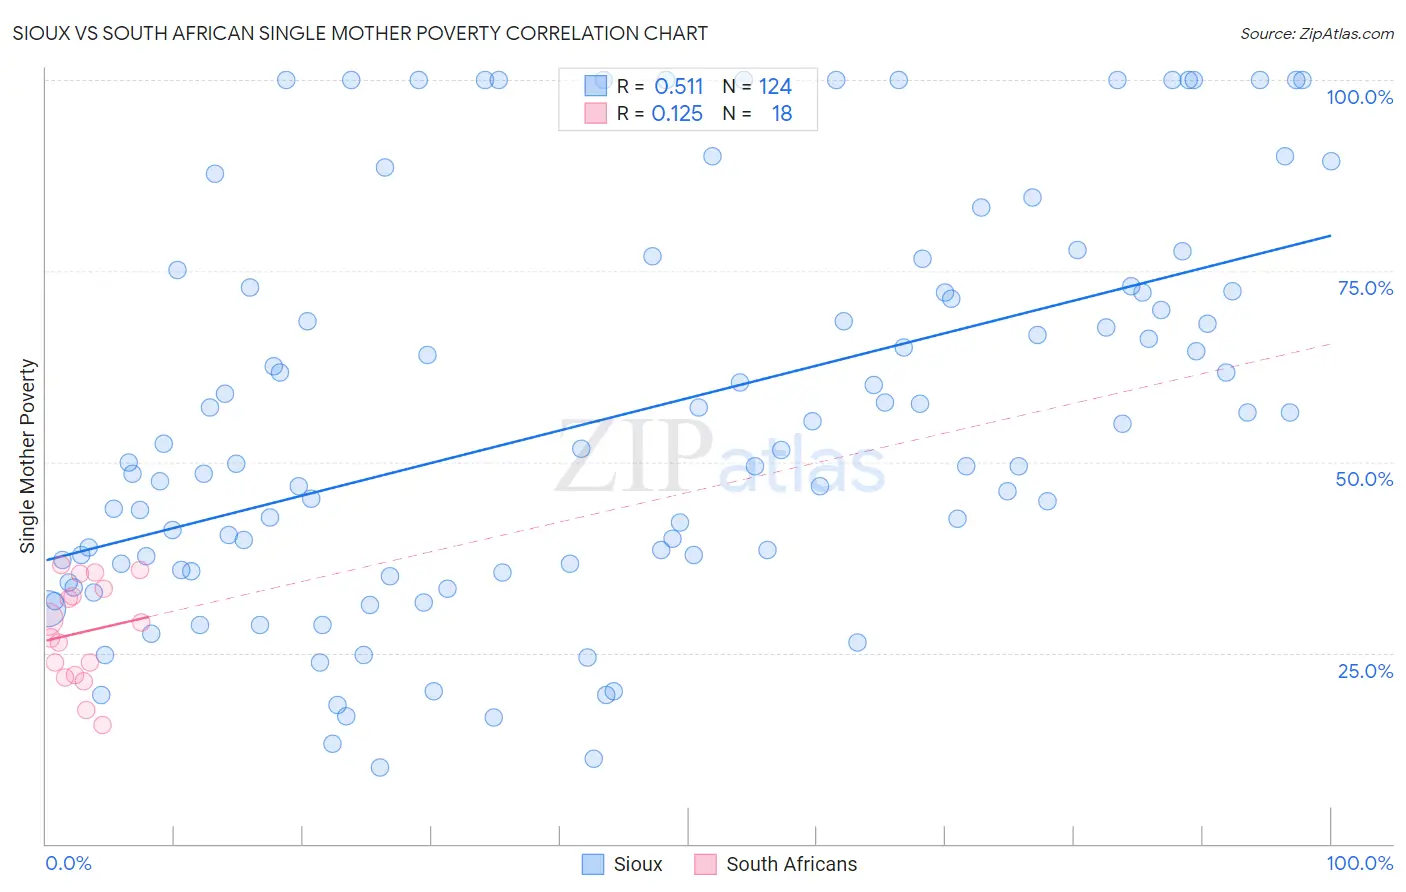 Sioux vs South African Single Mother Poverty